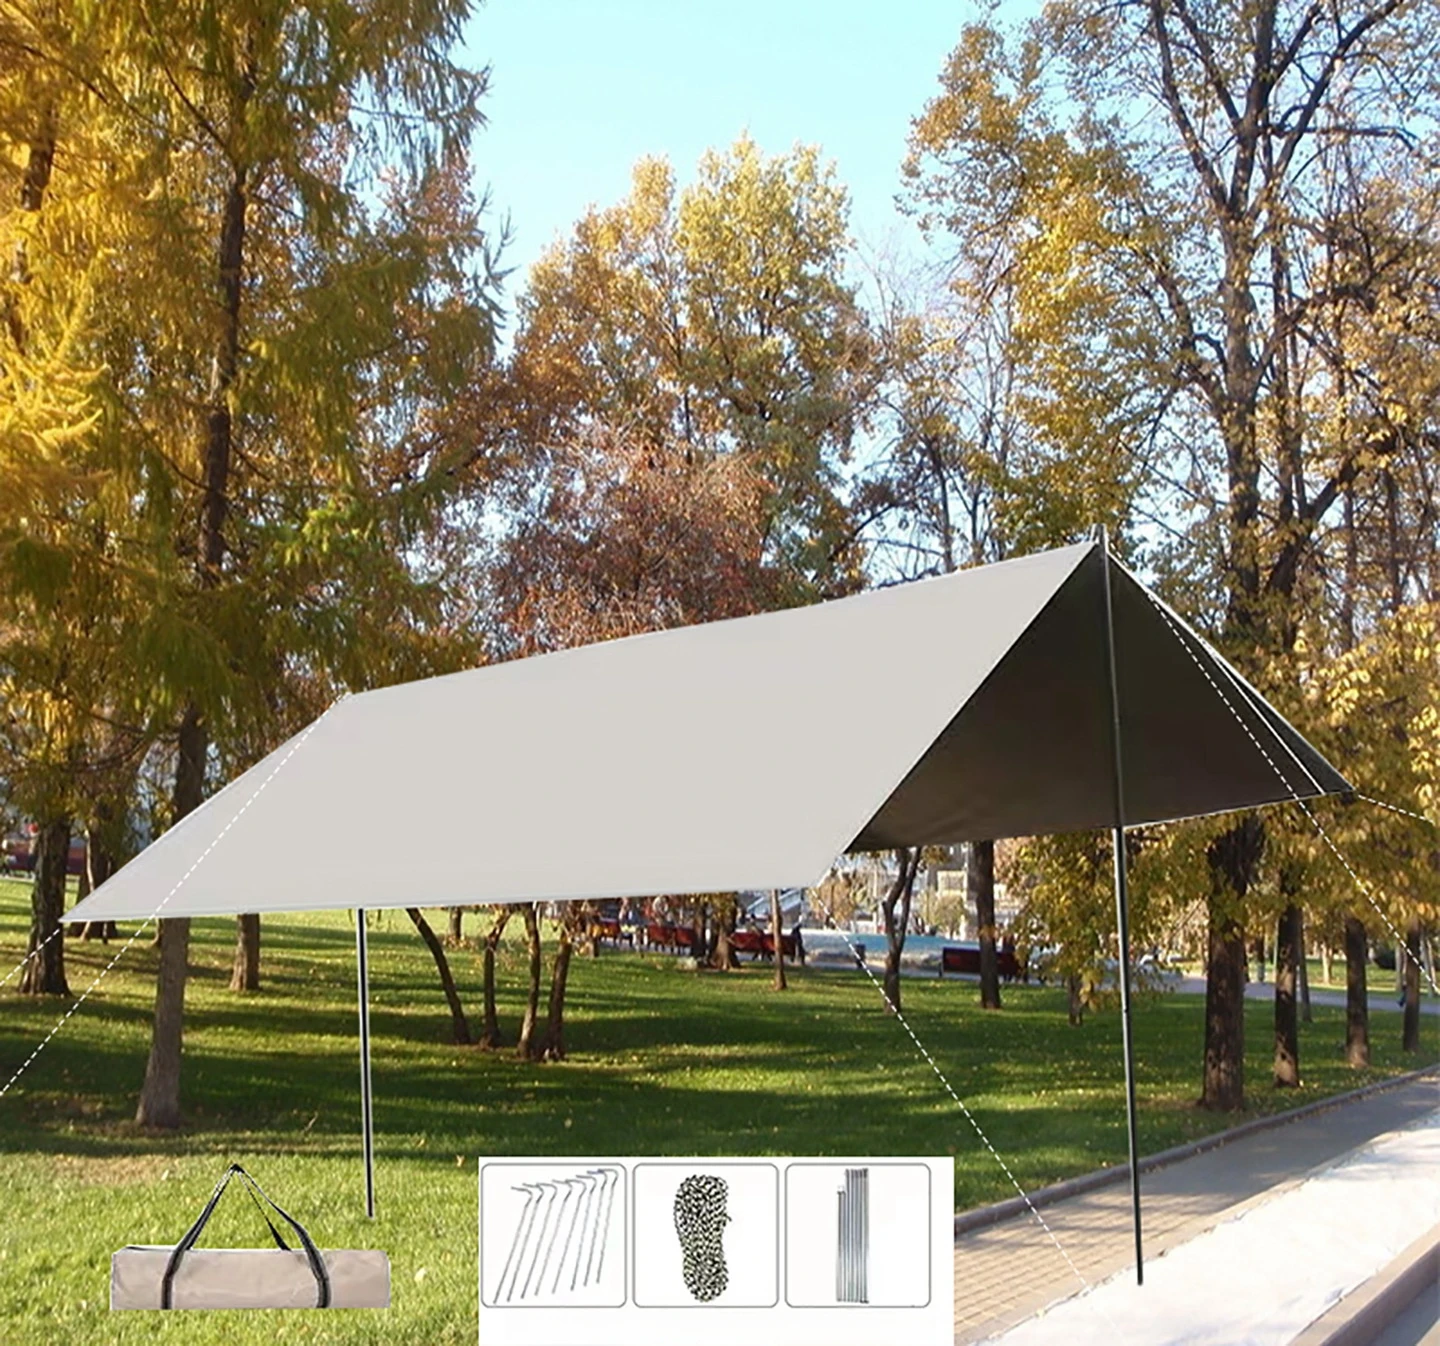 

Outdoor Black Rubber Canopy Hexagonal Camping Supplies Portable Sun Rain UV Sun And Wind Proof Canopy New